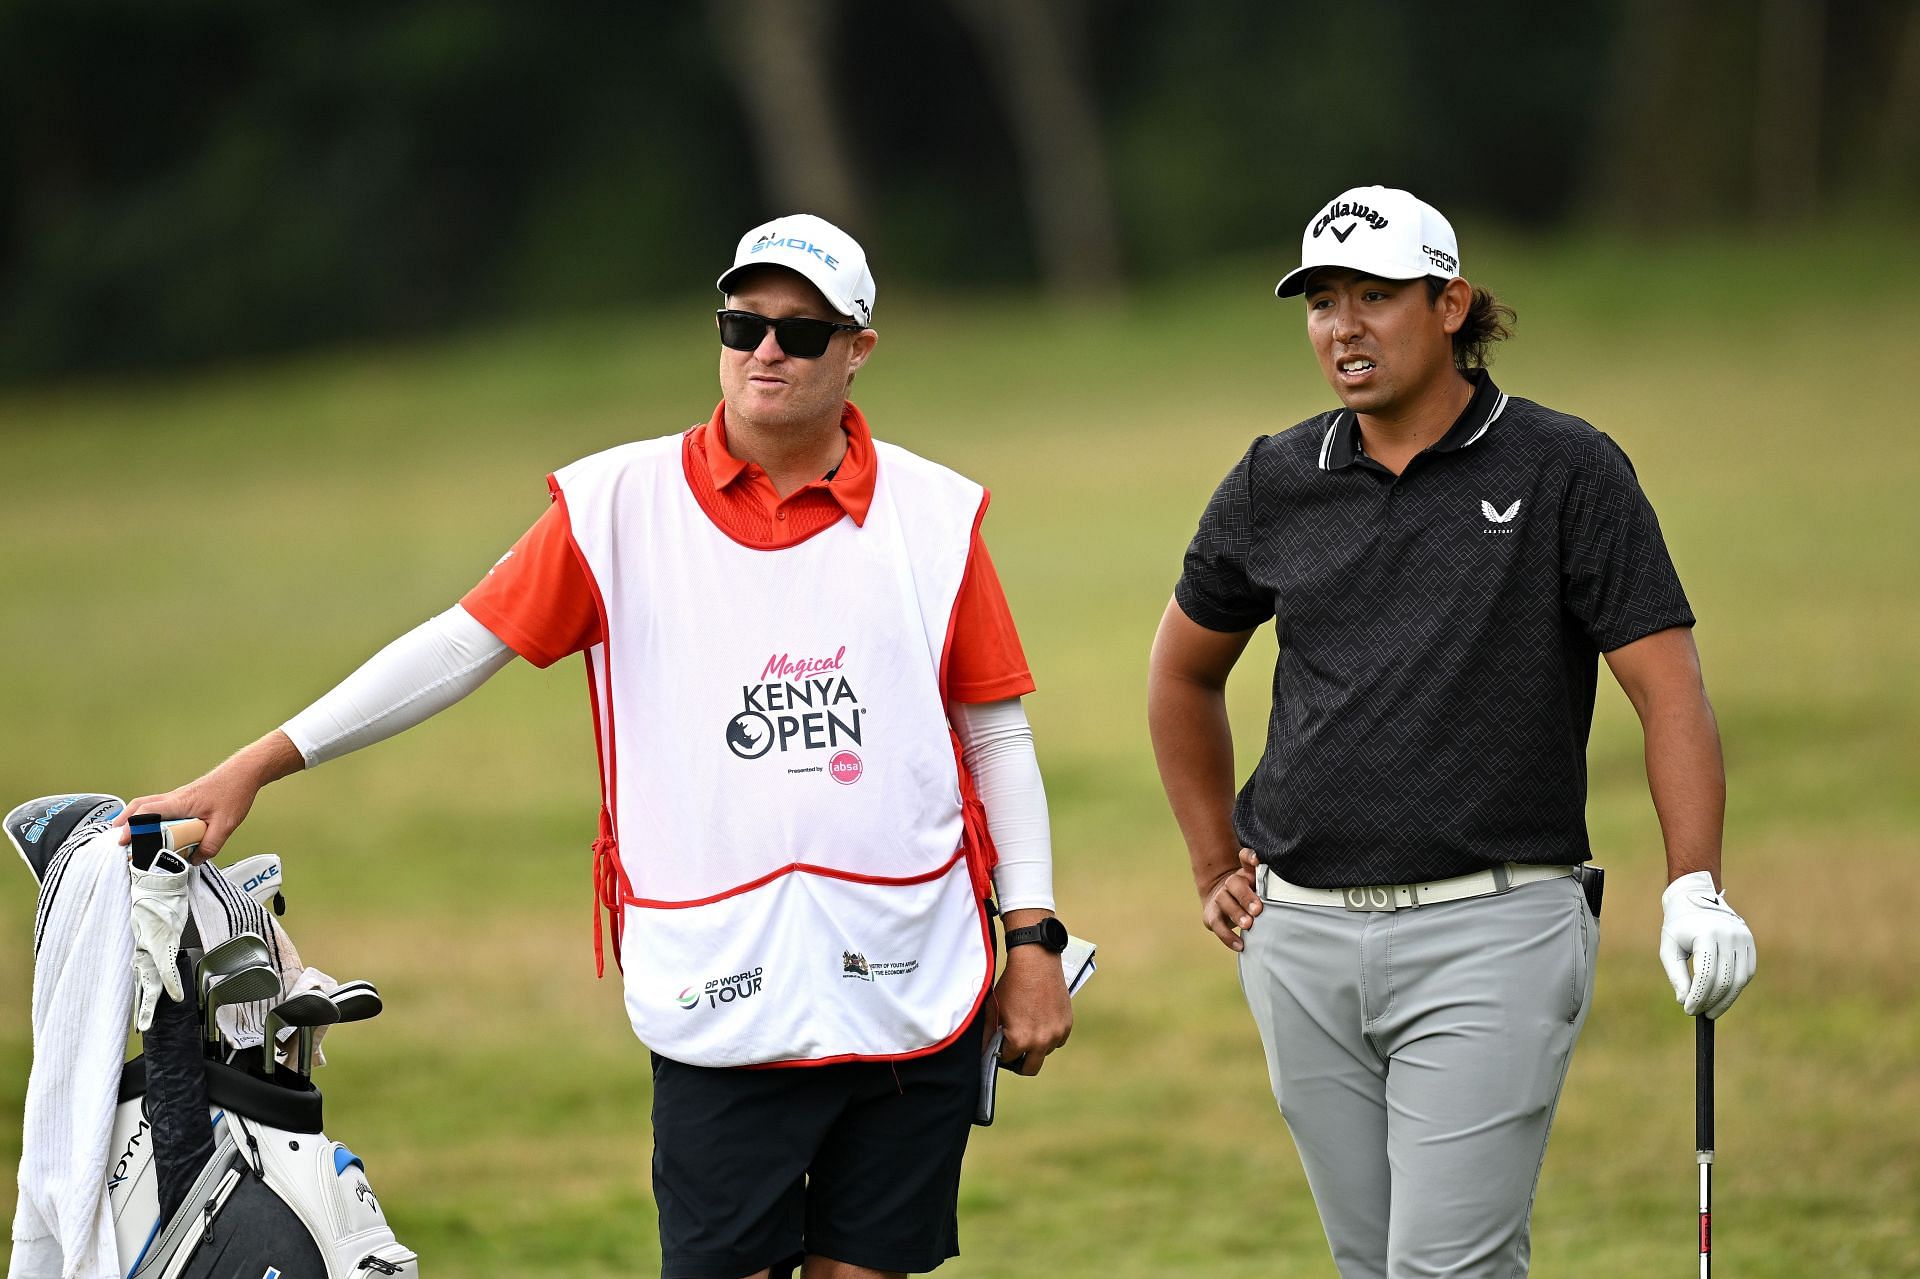 The Asian Tour has exploded in relevance